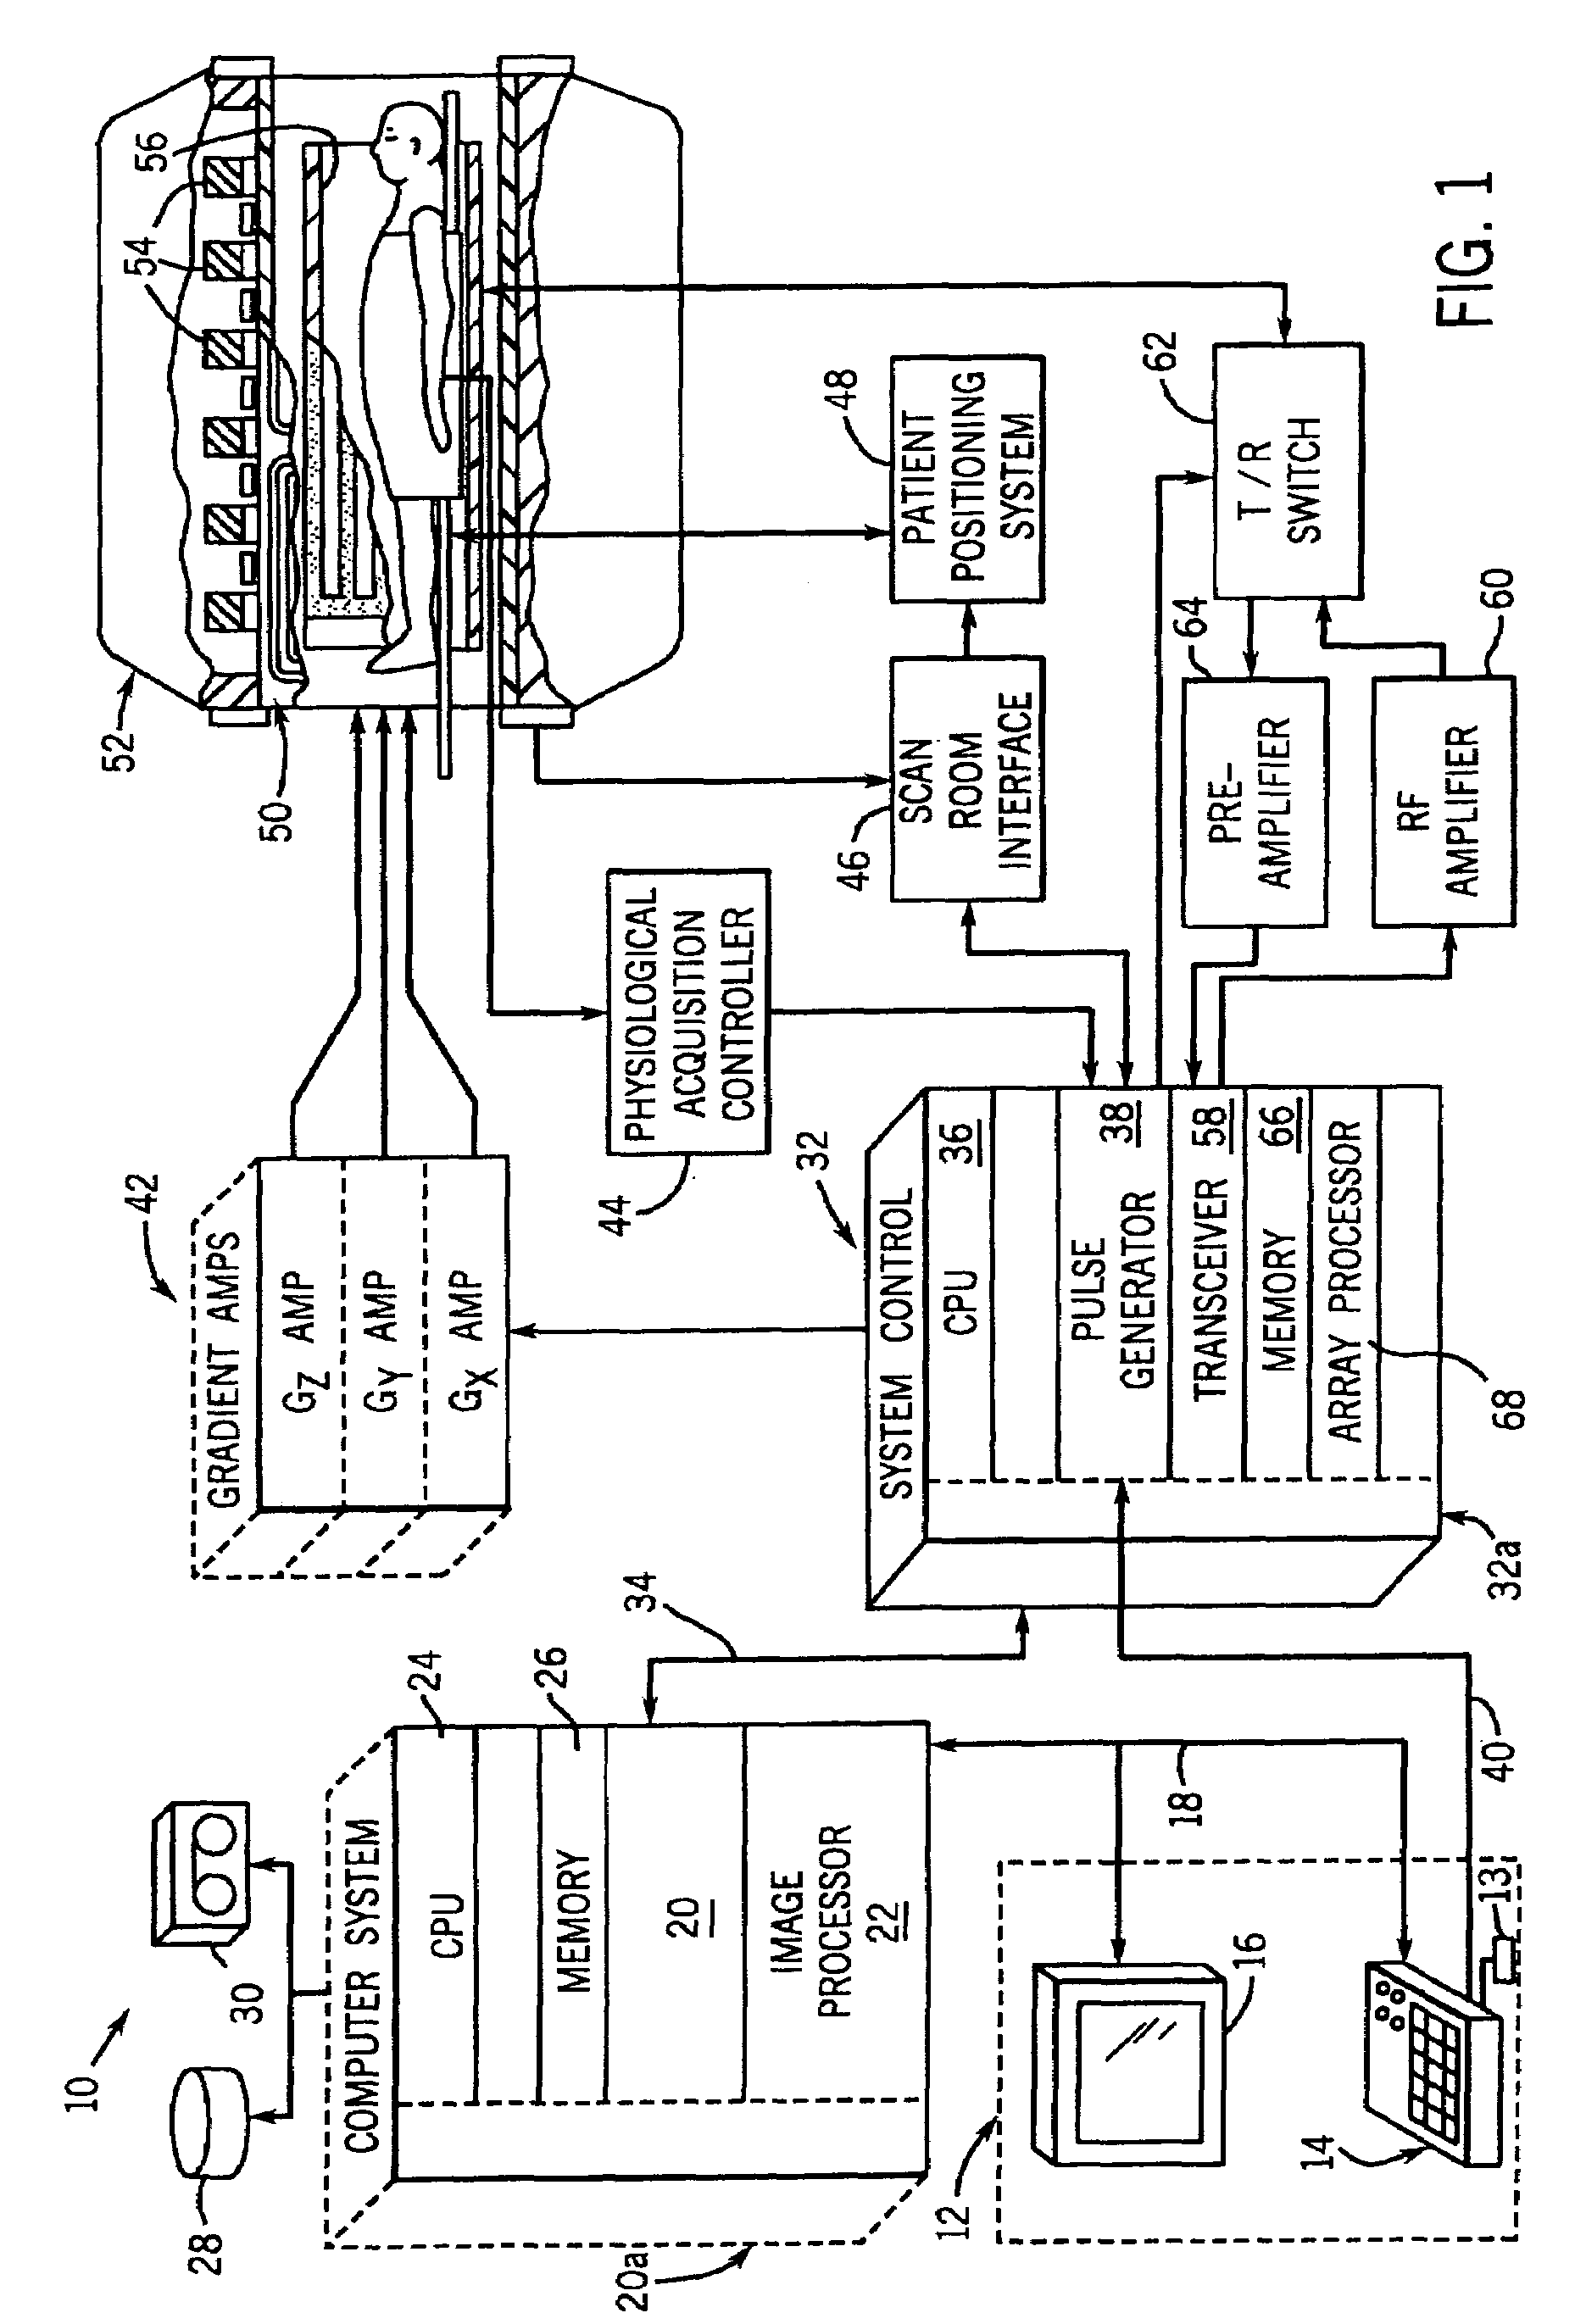 Method and apparatus of echo planar imaging with real-time determination of phase correction coefficients